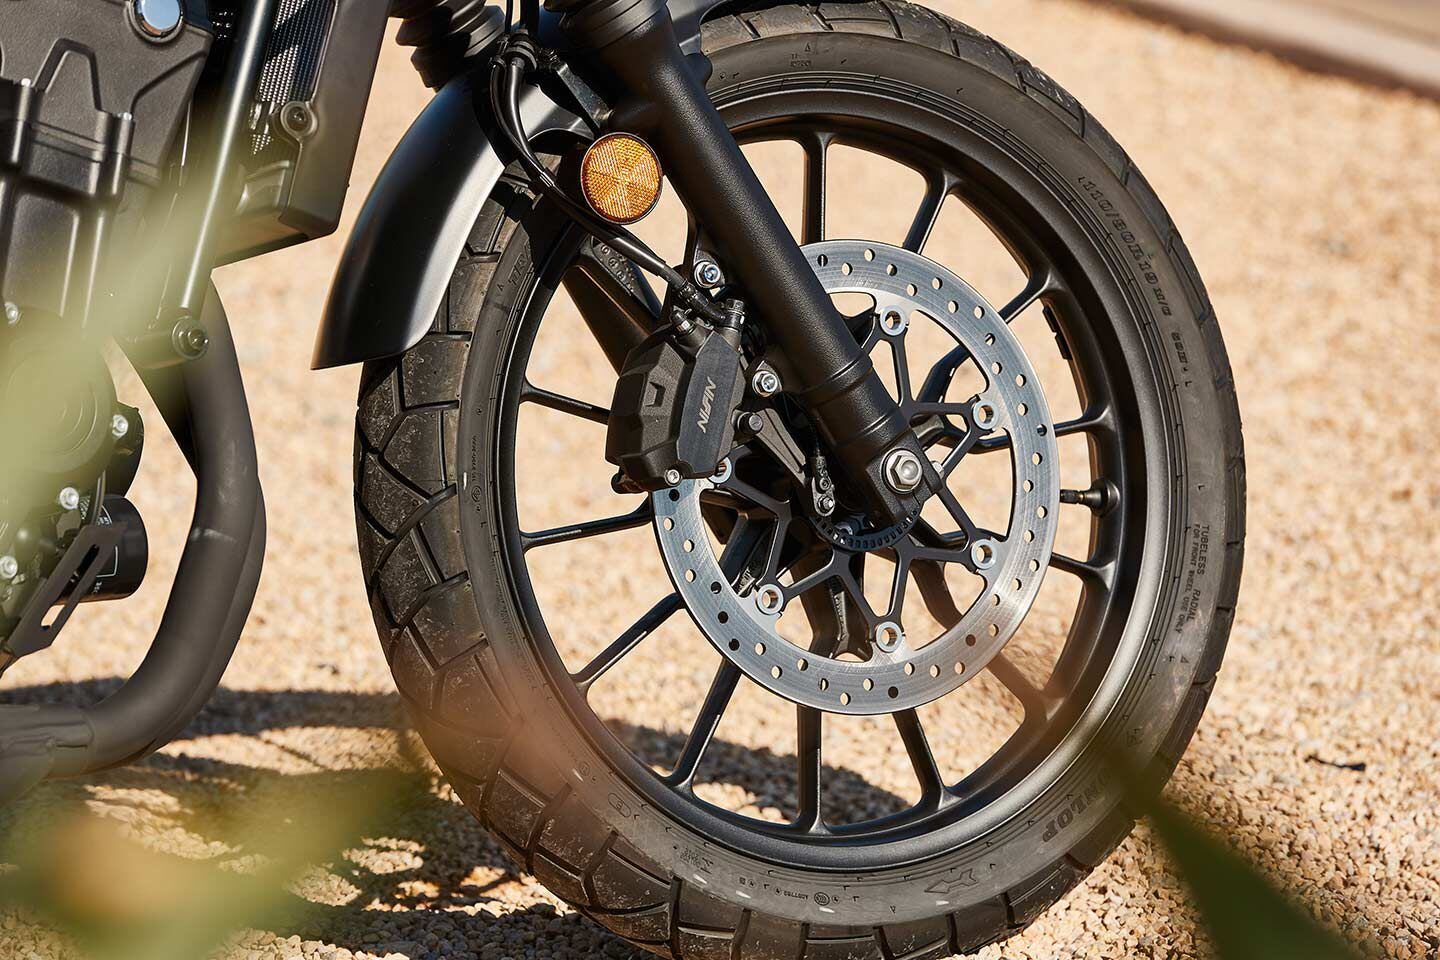 The SCL500 gets a larger brake disc than its 500 stablemates, while also rolling on Dunlop Trailmax Mixtour tires. Single disc saves weight and cost, and is all that’s really needed here.